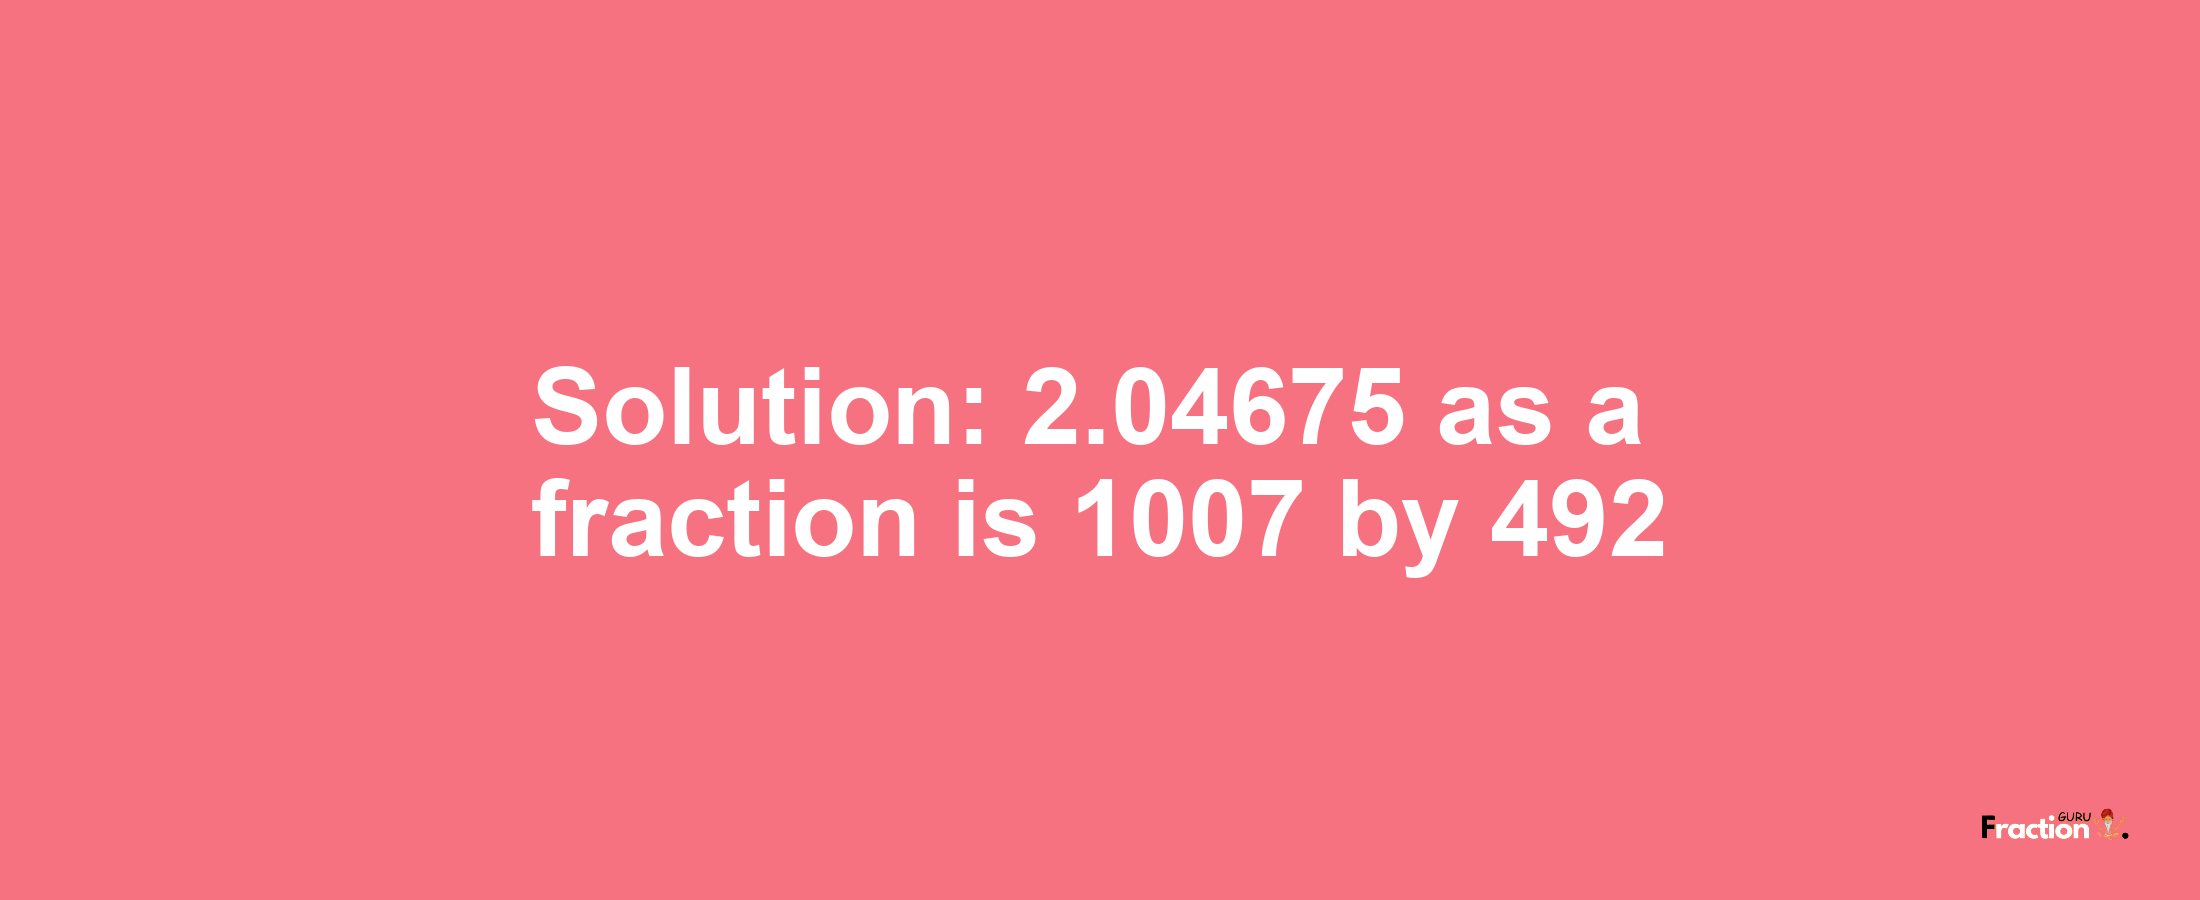 Solution:2.04675 as a fraction is 1007/492